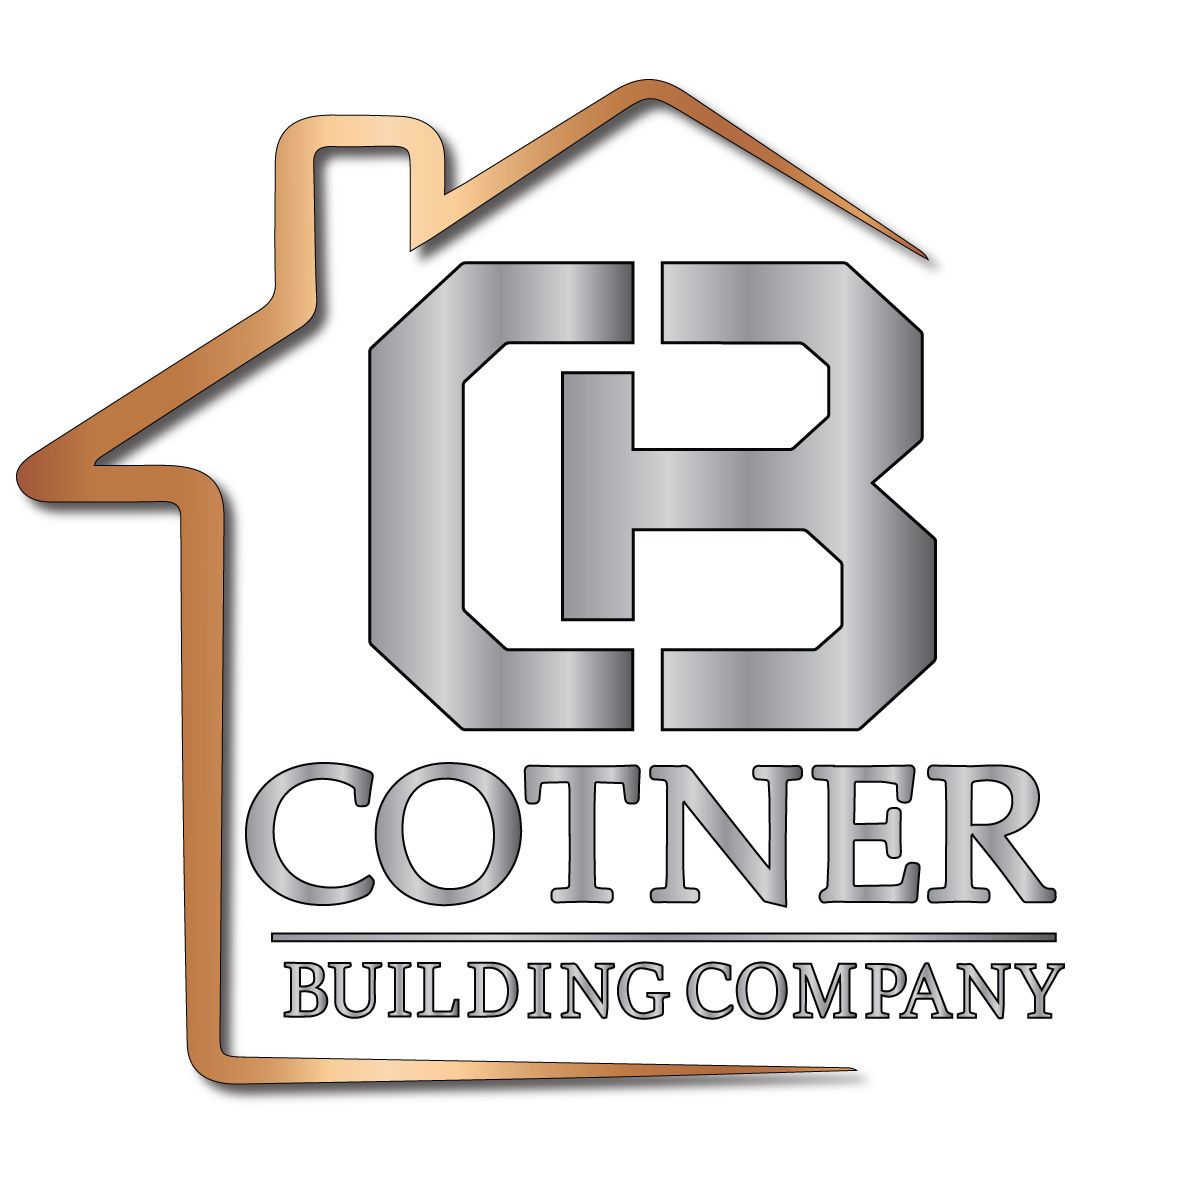 Cotner Building Company,83680